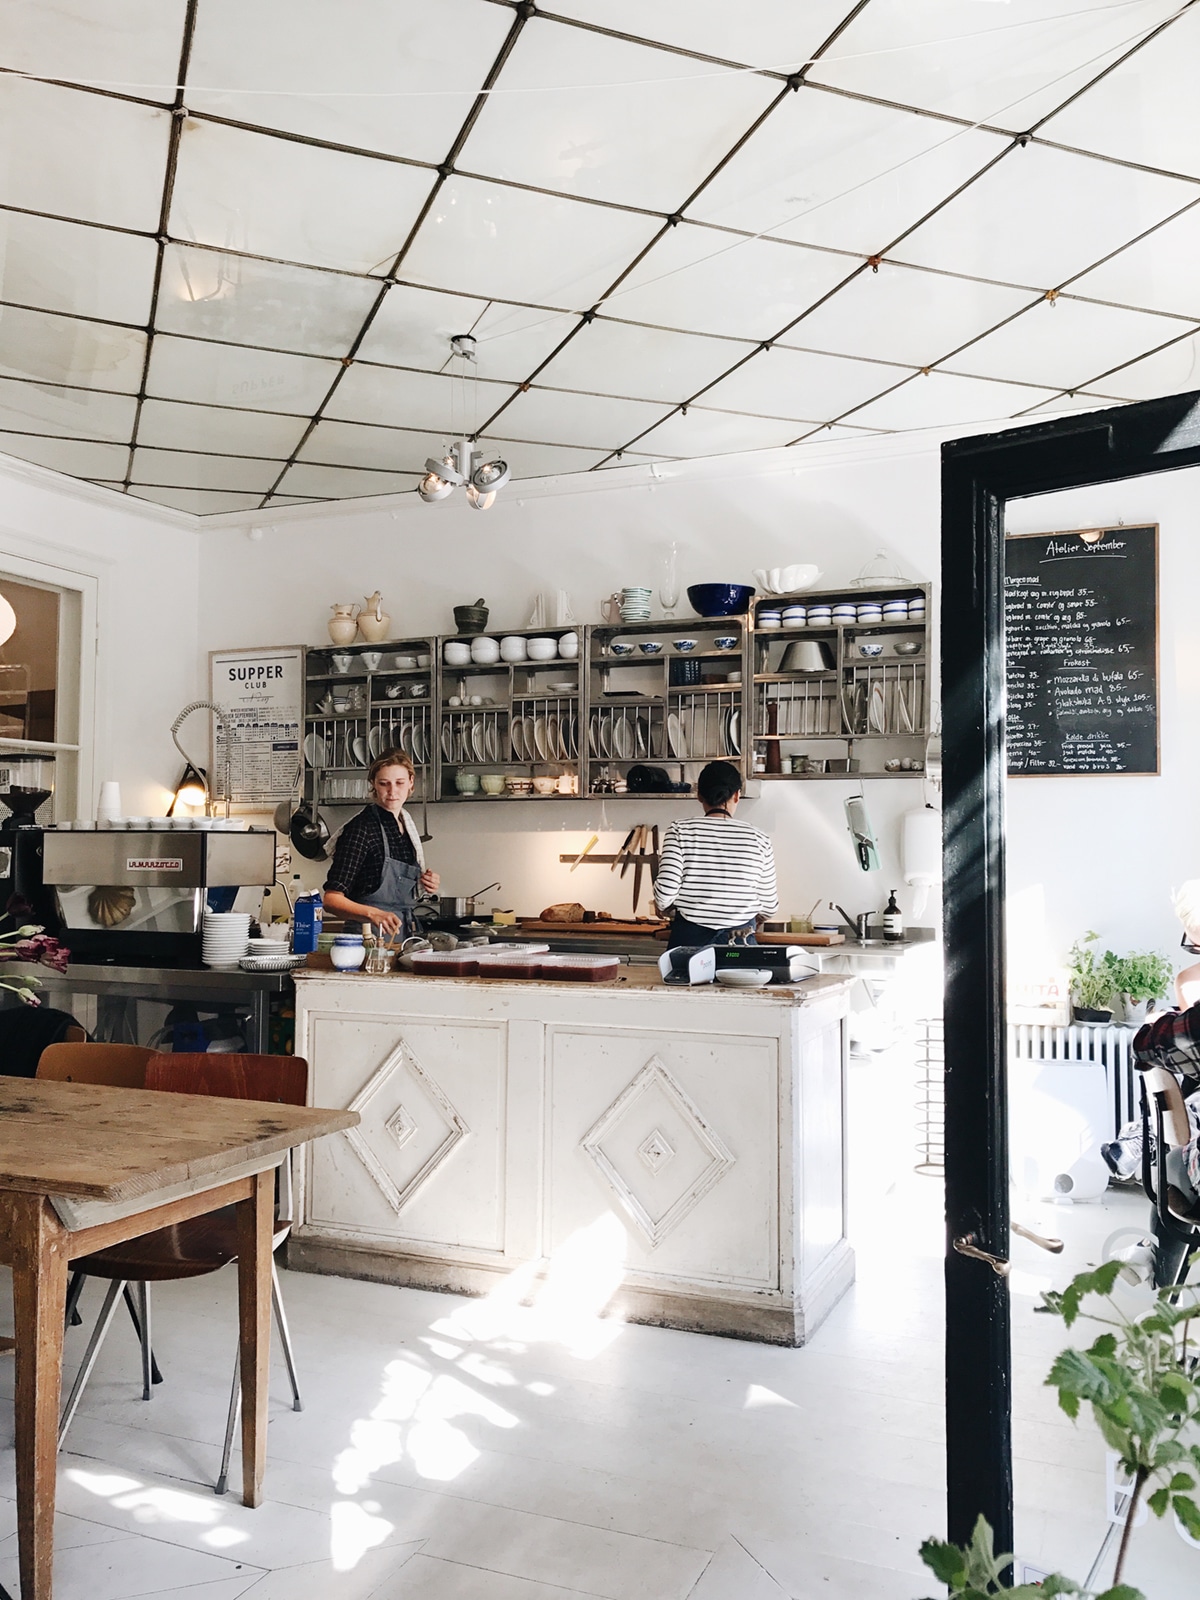 Atelier September is a bright and airy coffee shop and design store | copenhagen city guide on coco kelley